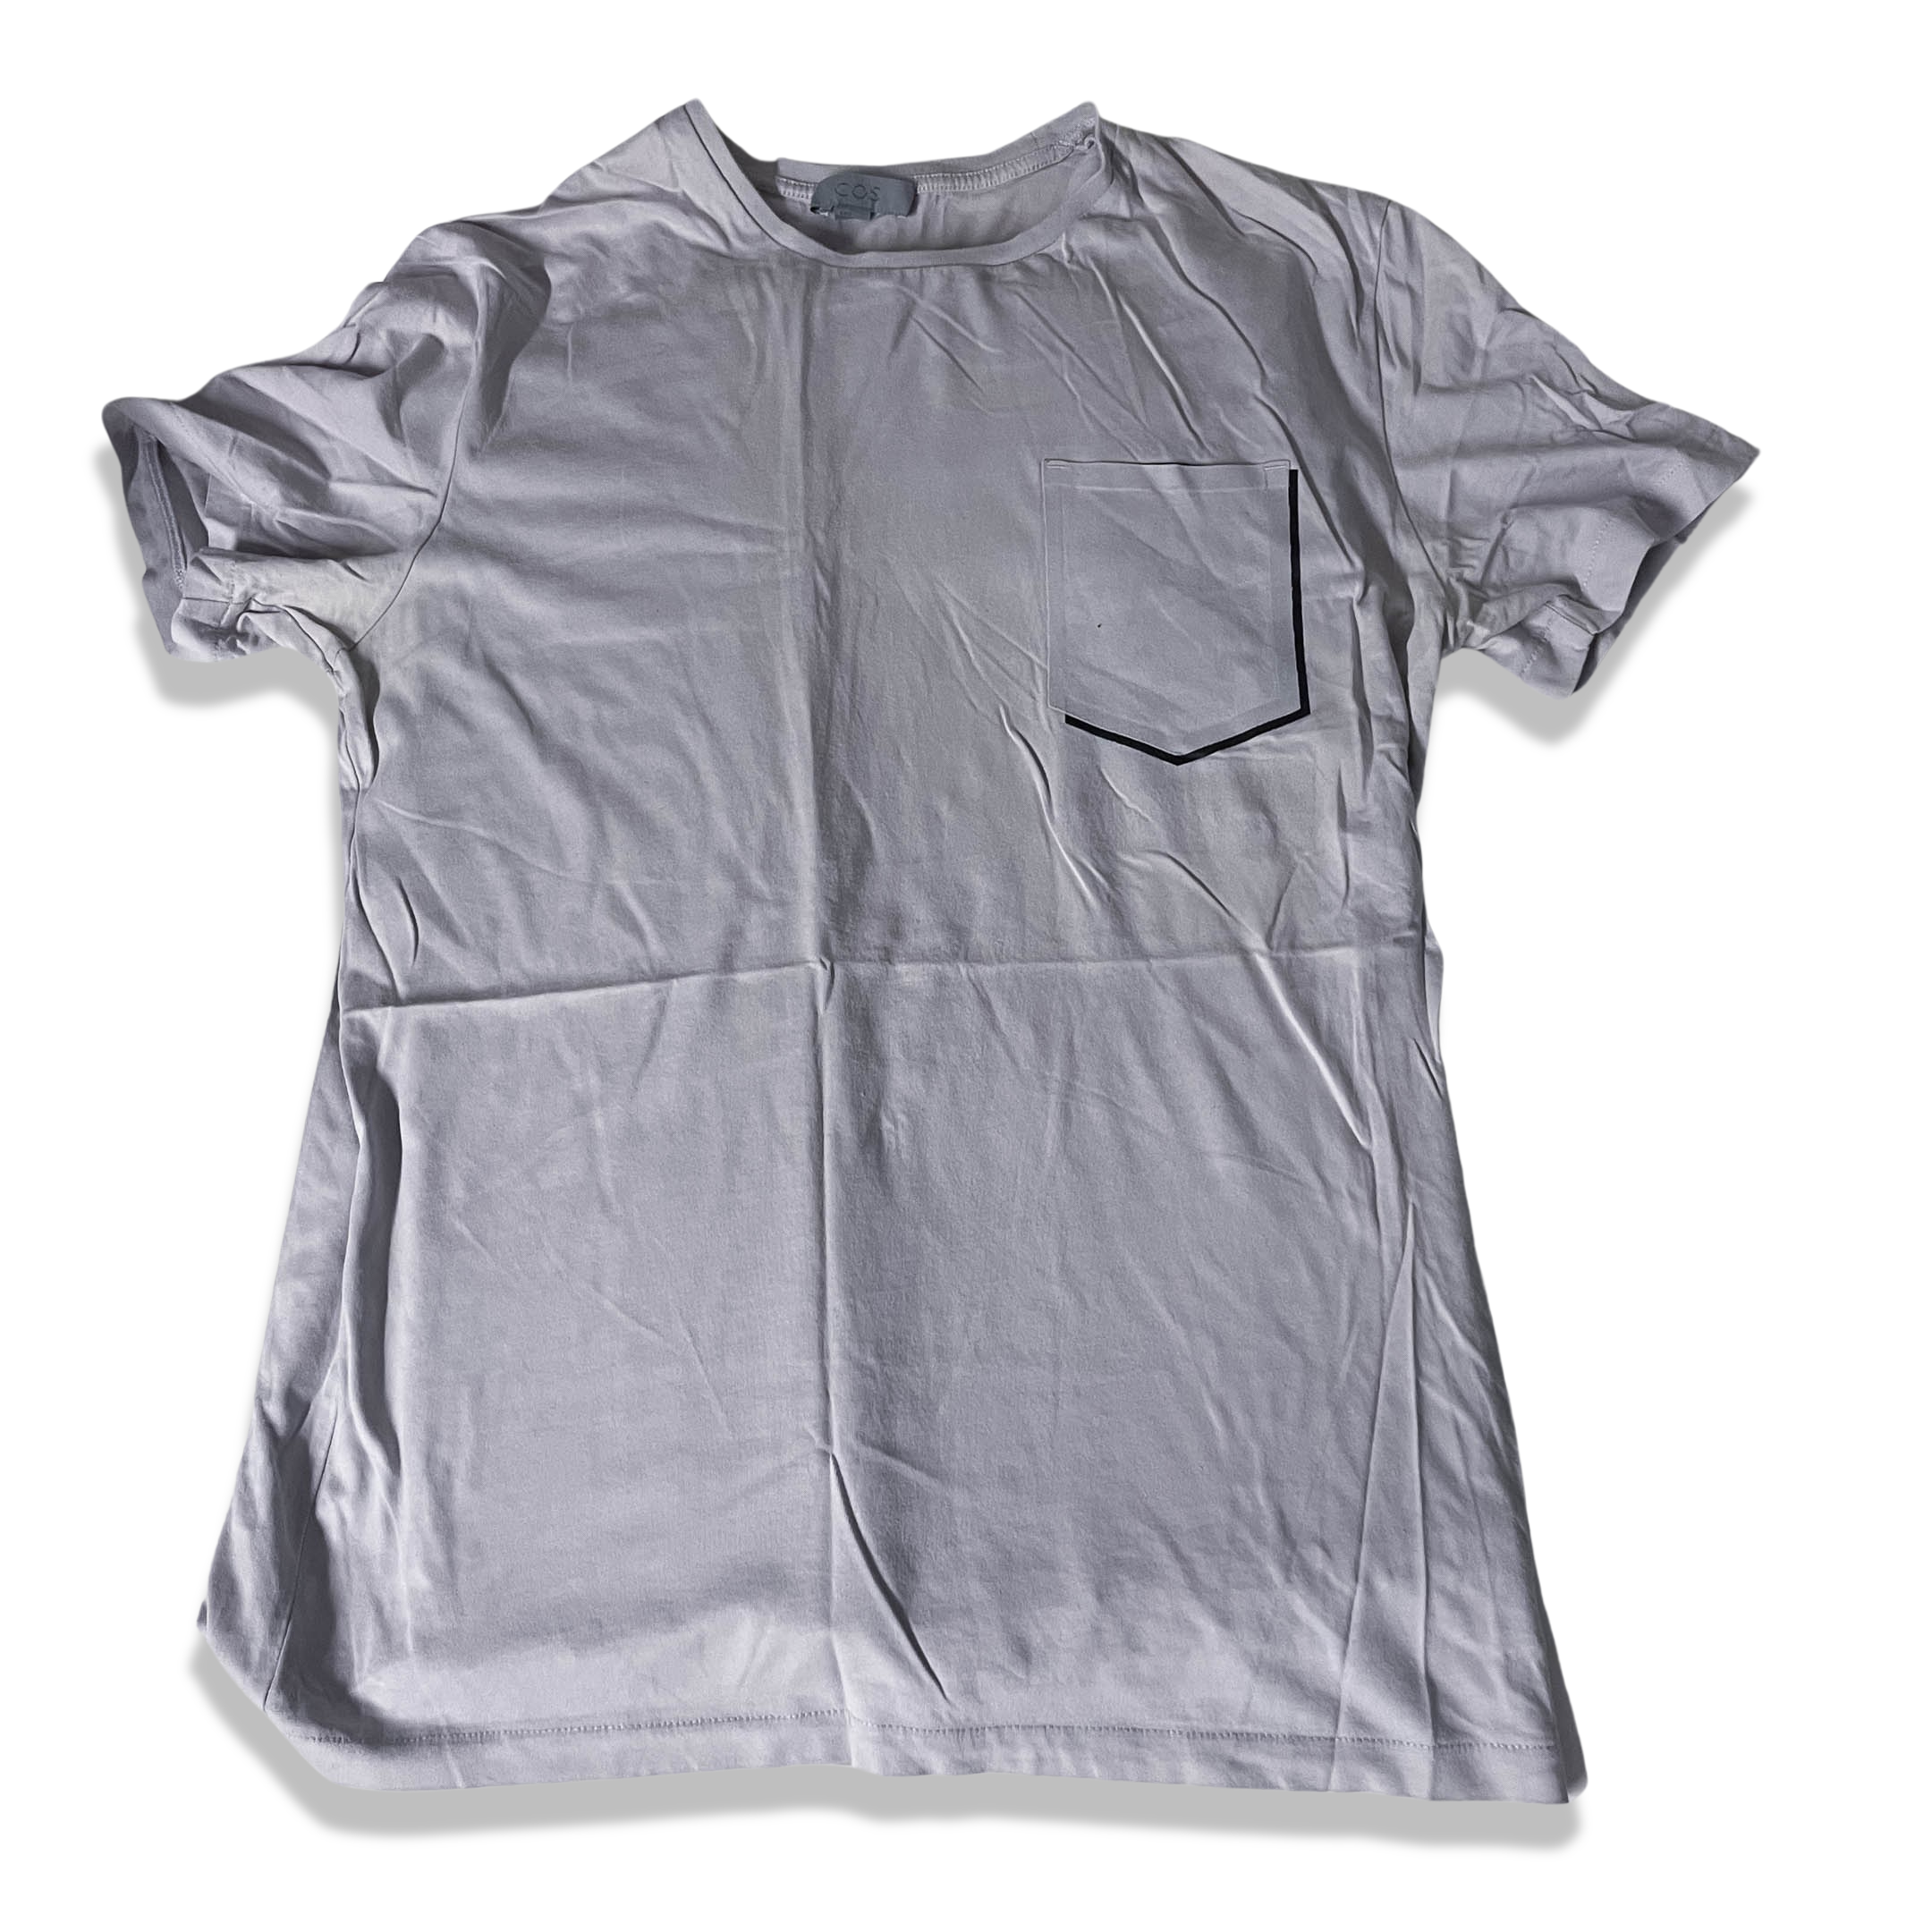 Vintage COS grey small mens short sleeve tees with front chest pocket